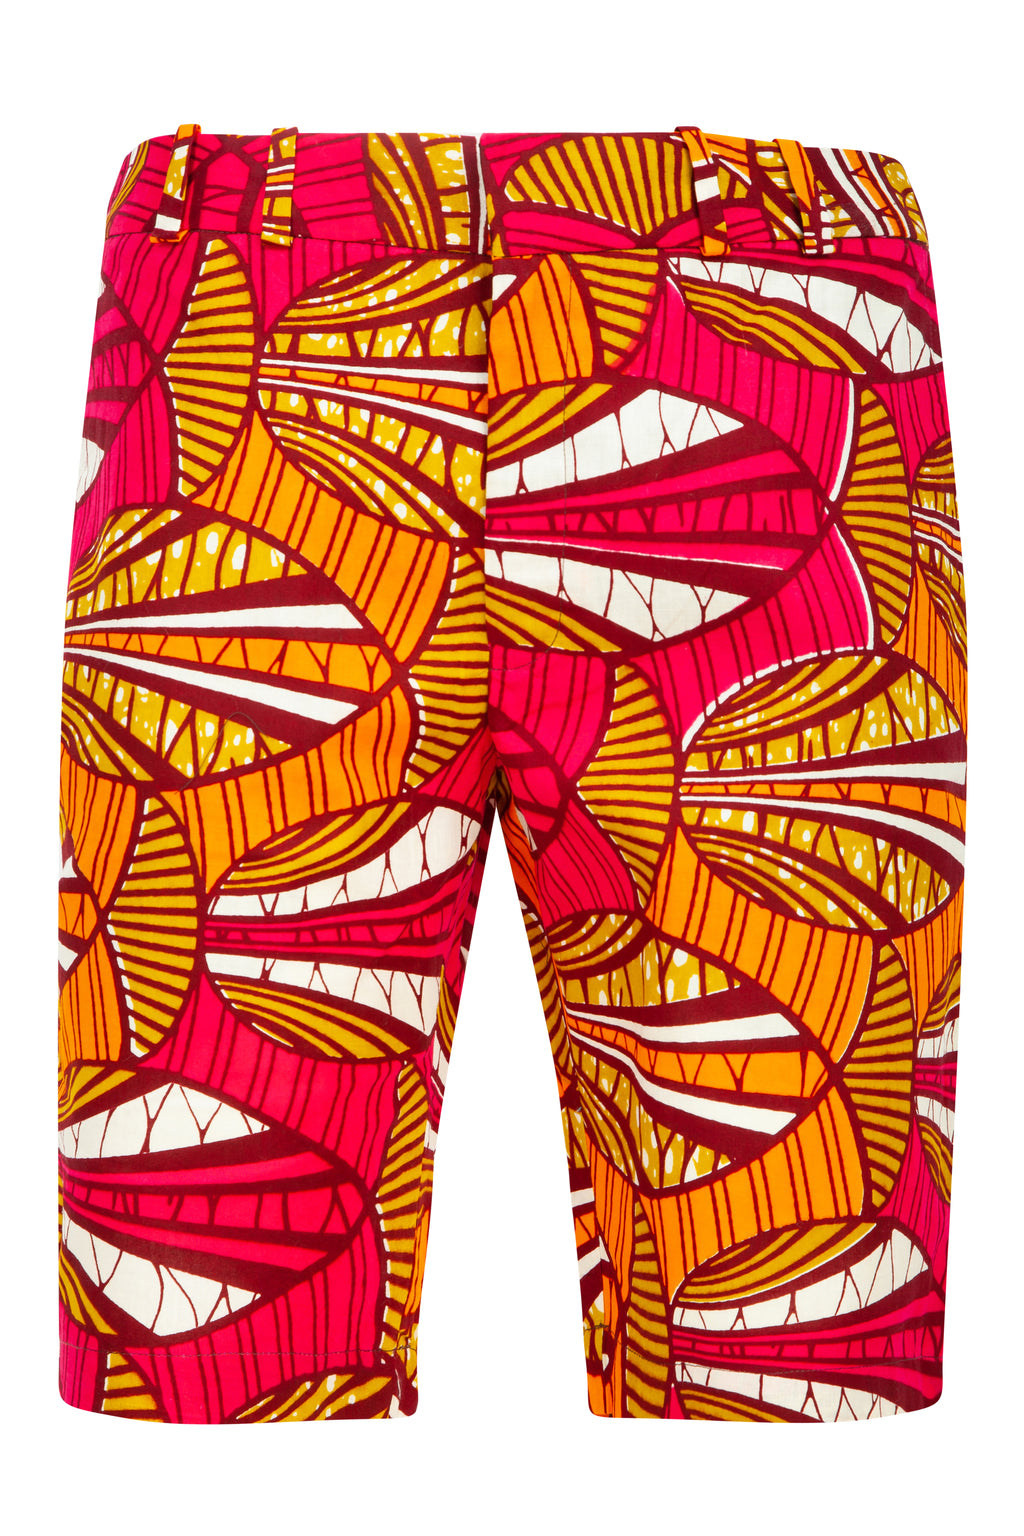 TROUSERS & SHORTS – OHEMA OHENE AFRICAN INSPIRED FASHION